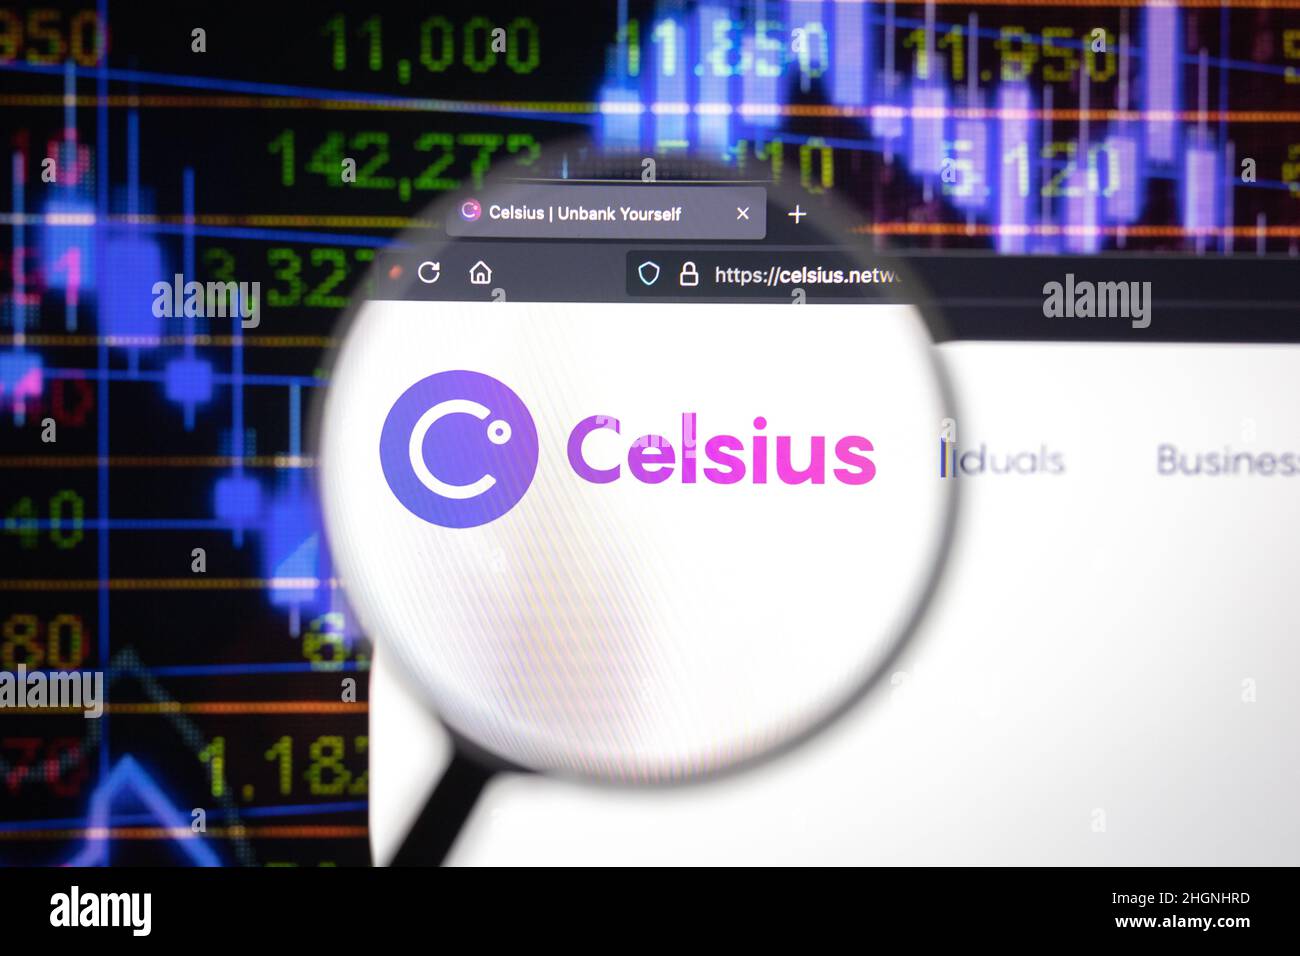 Celsius crypto company logo on a website, seen on a computer screen through a magnifying glass. Stock Photo